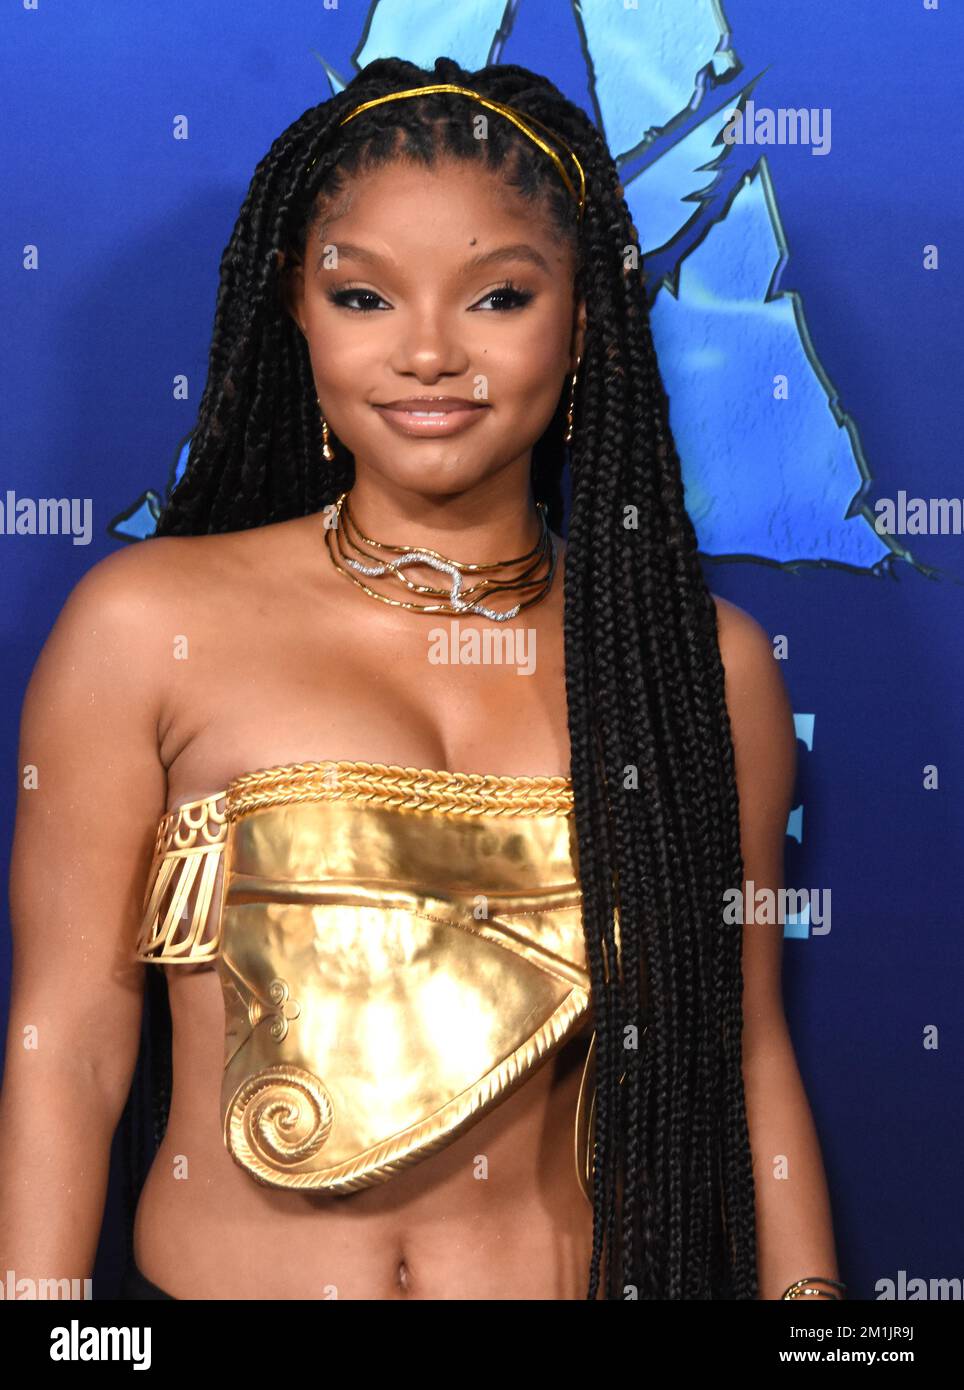 Hollywood, California, USA 12th December 2022 Actress Halle Bailey attends  20th Century Studio's 'Avatar 2: The Way of Water' U.S. Premiere at Dolby  Theatre on December 12, 2022 in Hollywood, California, USA.